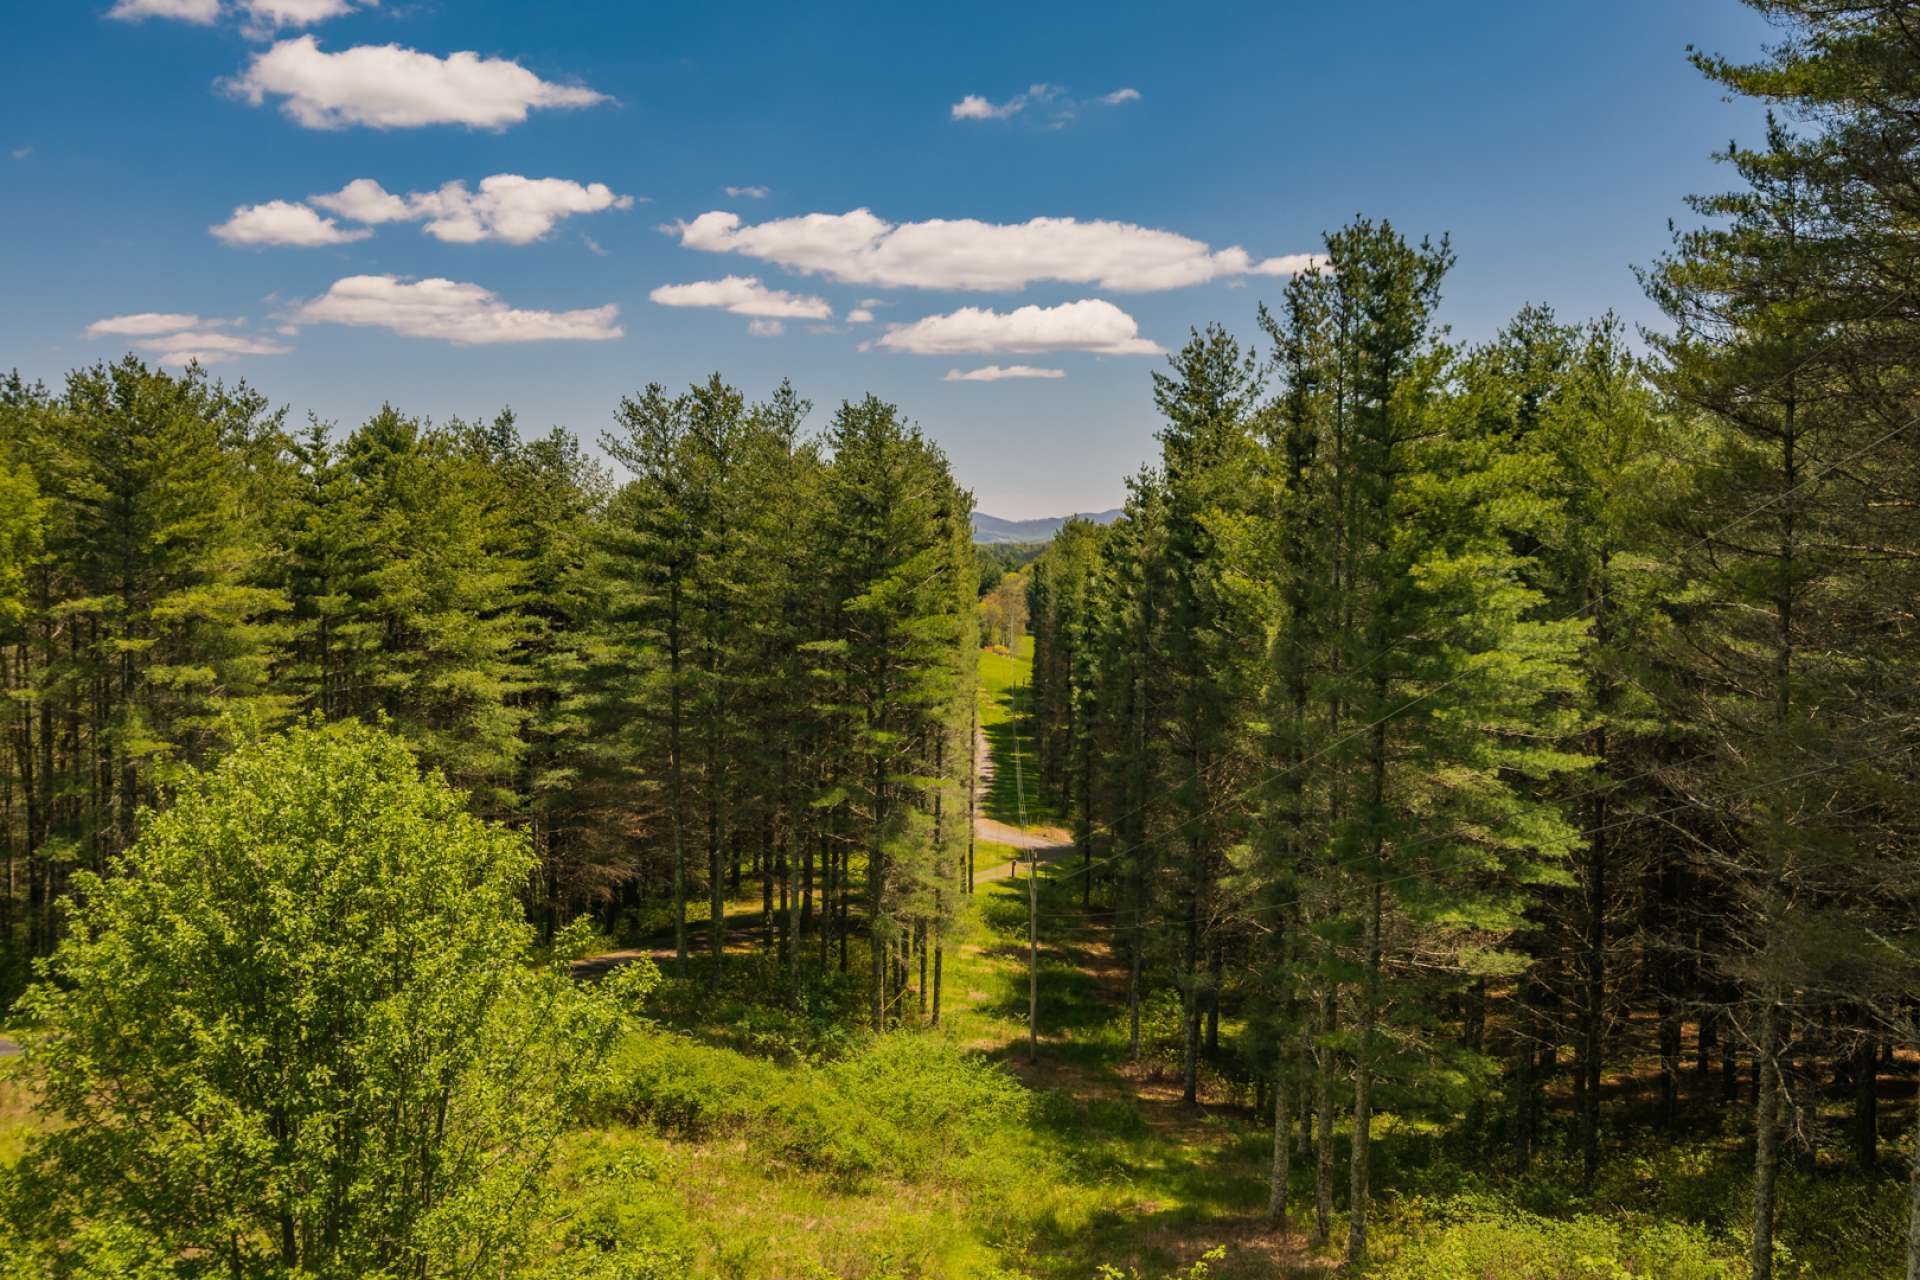 The sellers planted white pines that can be harvested to open up and expand the long range views.